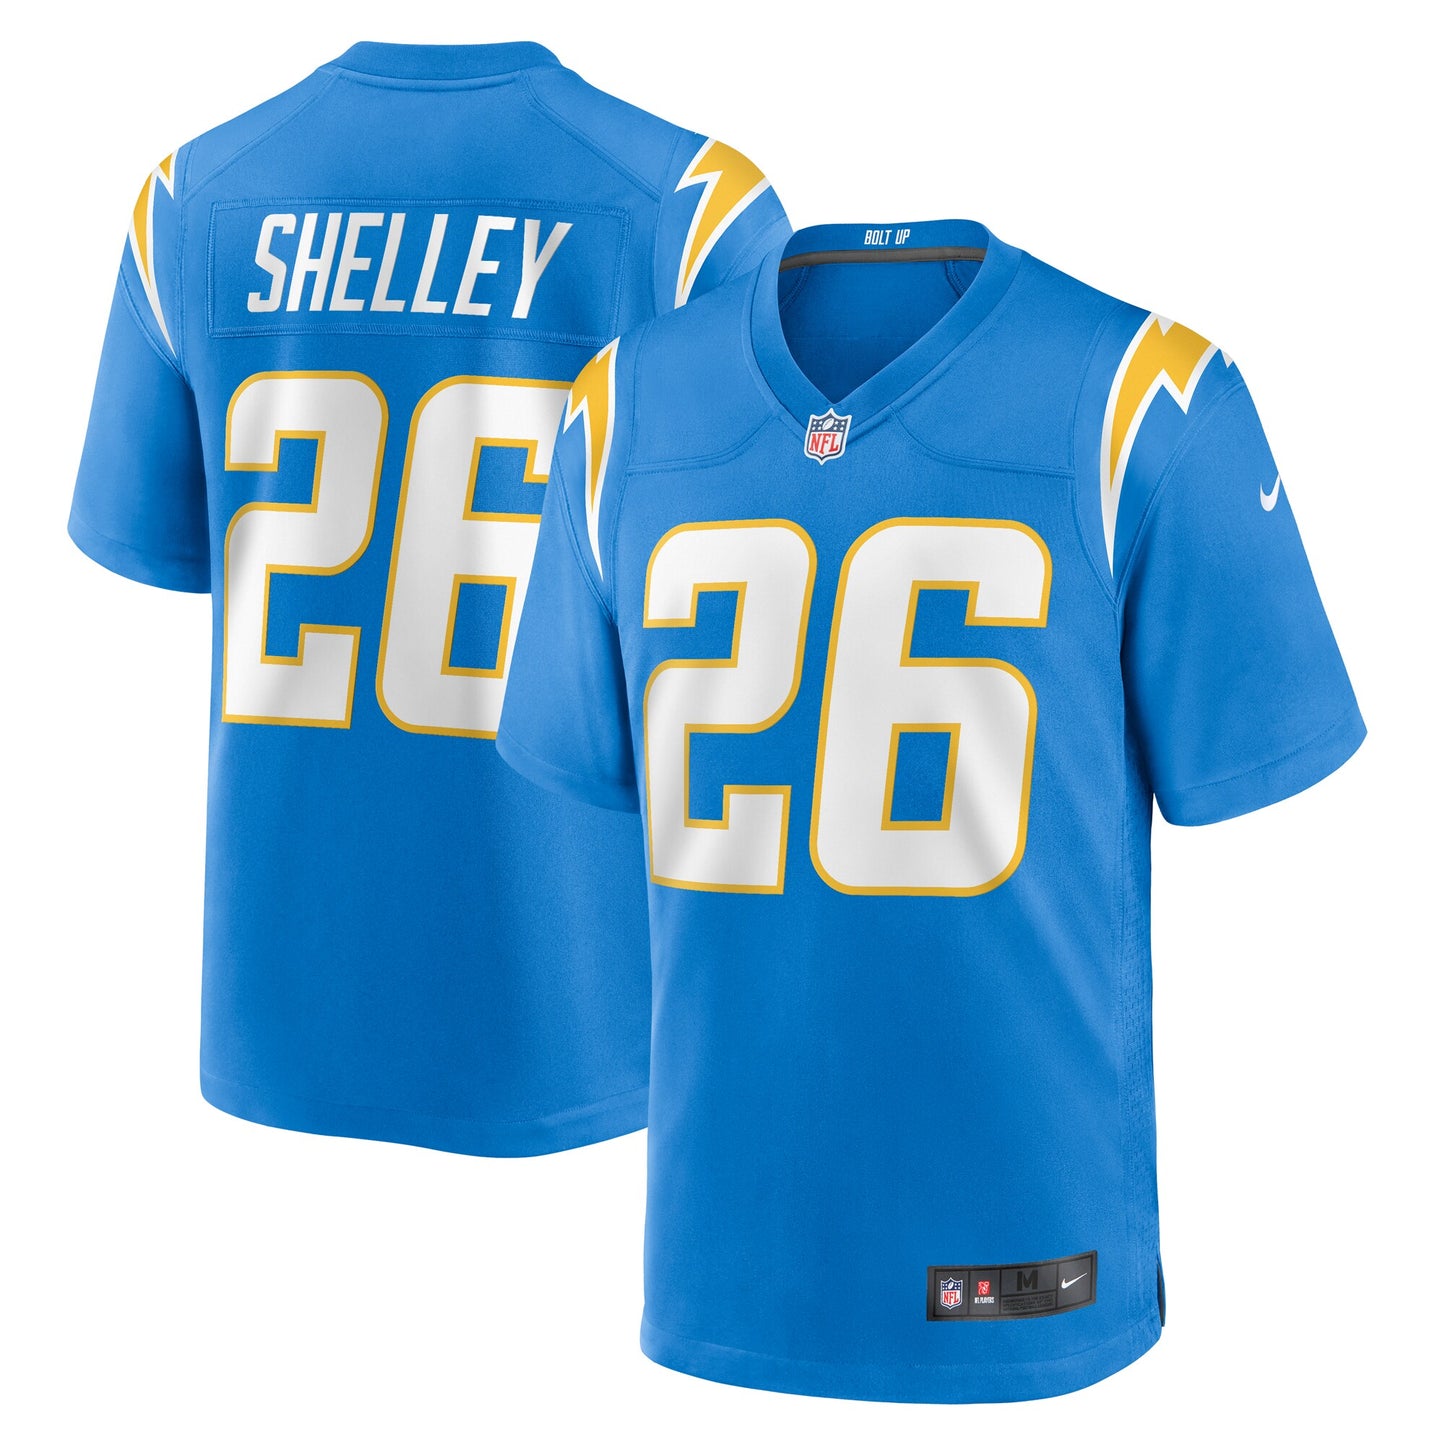 Duke Shelley Los Angeles Chargers Nike Team Game Jersey - Powder Blue